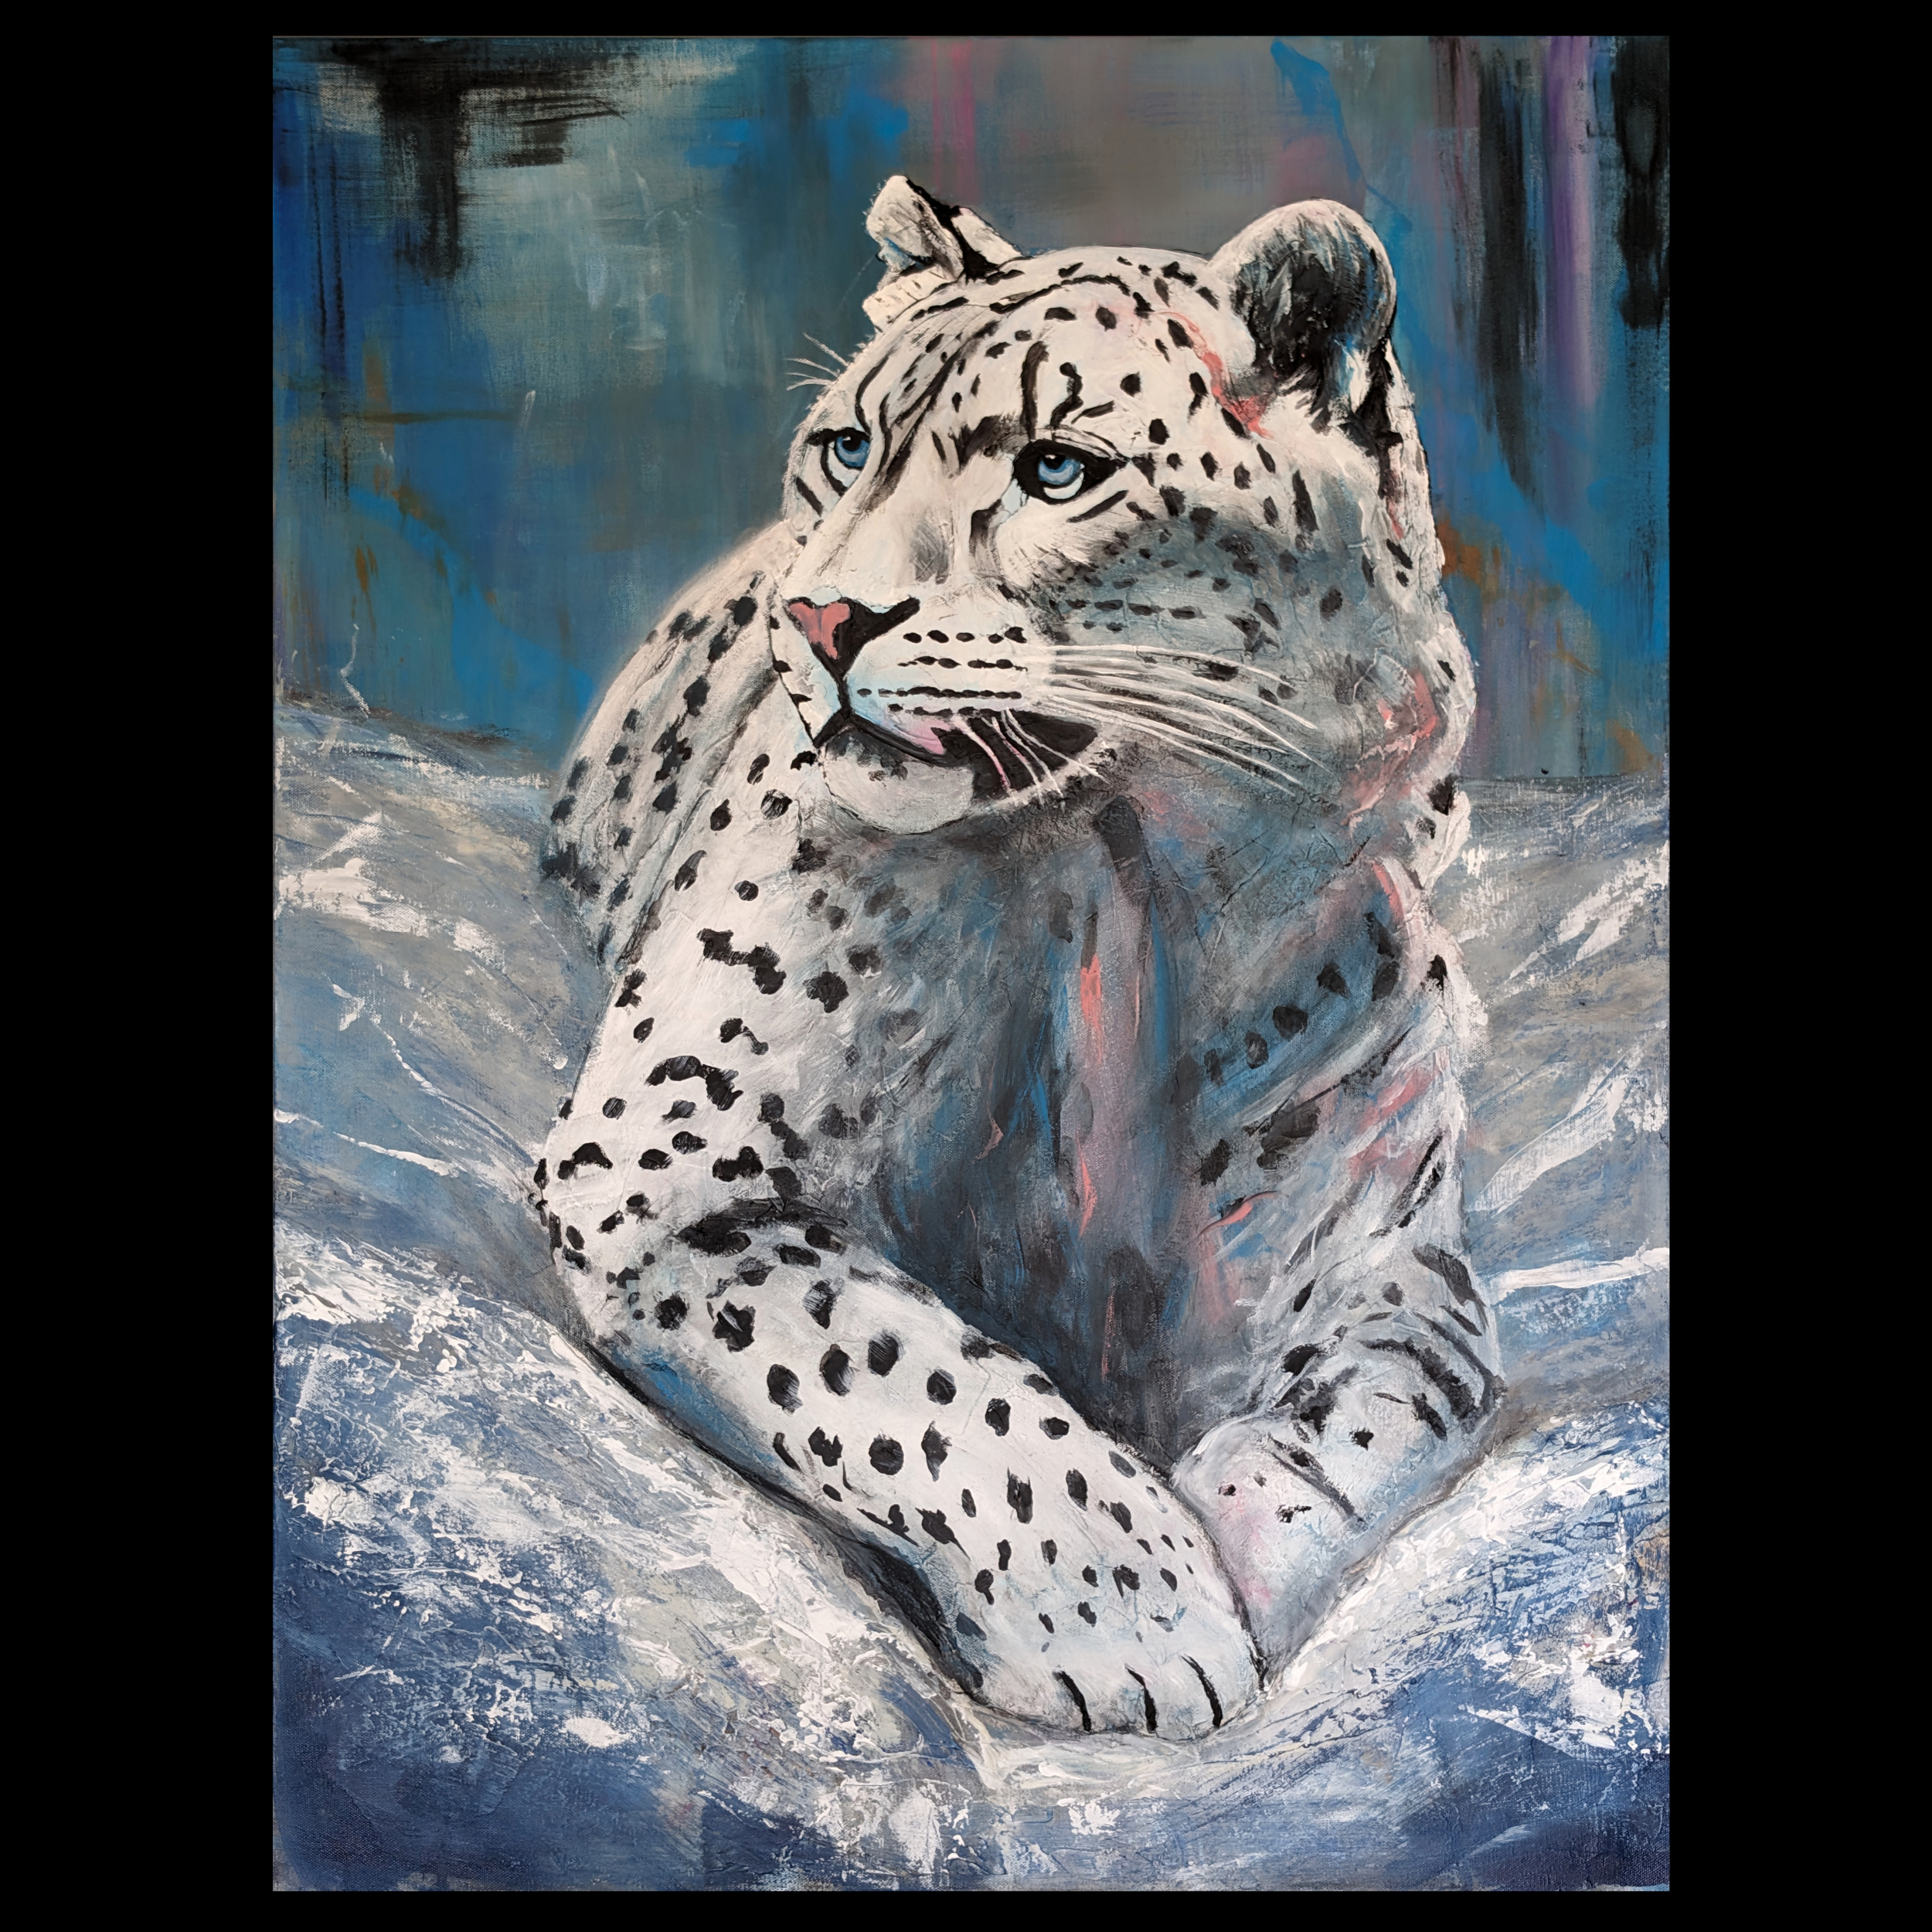 Snow Leopard Painting - Contact Gordo for price